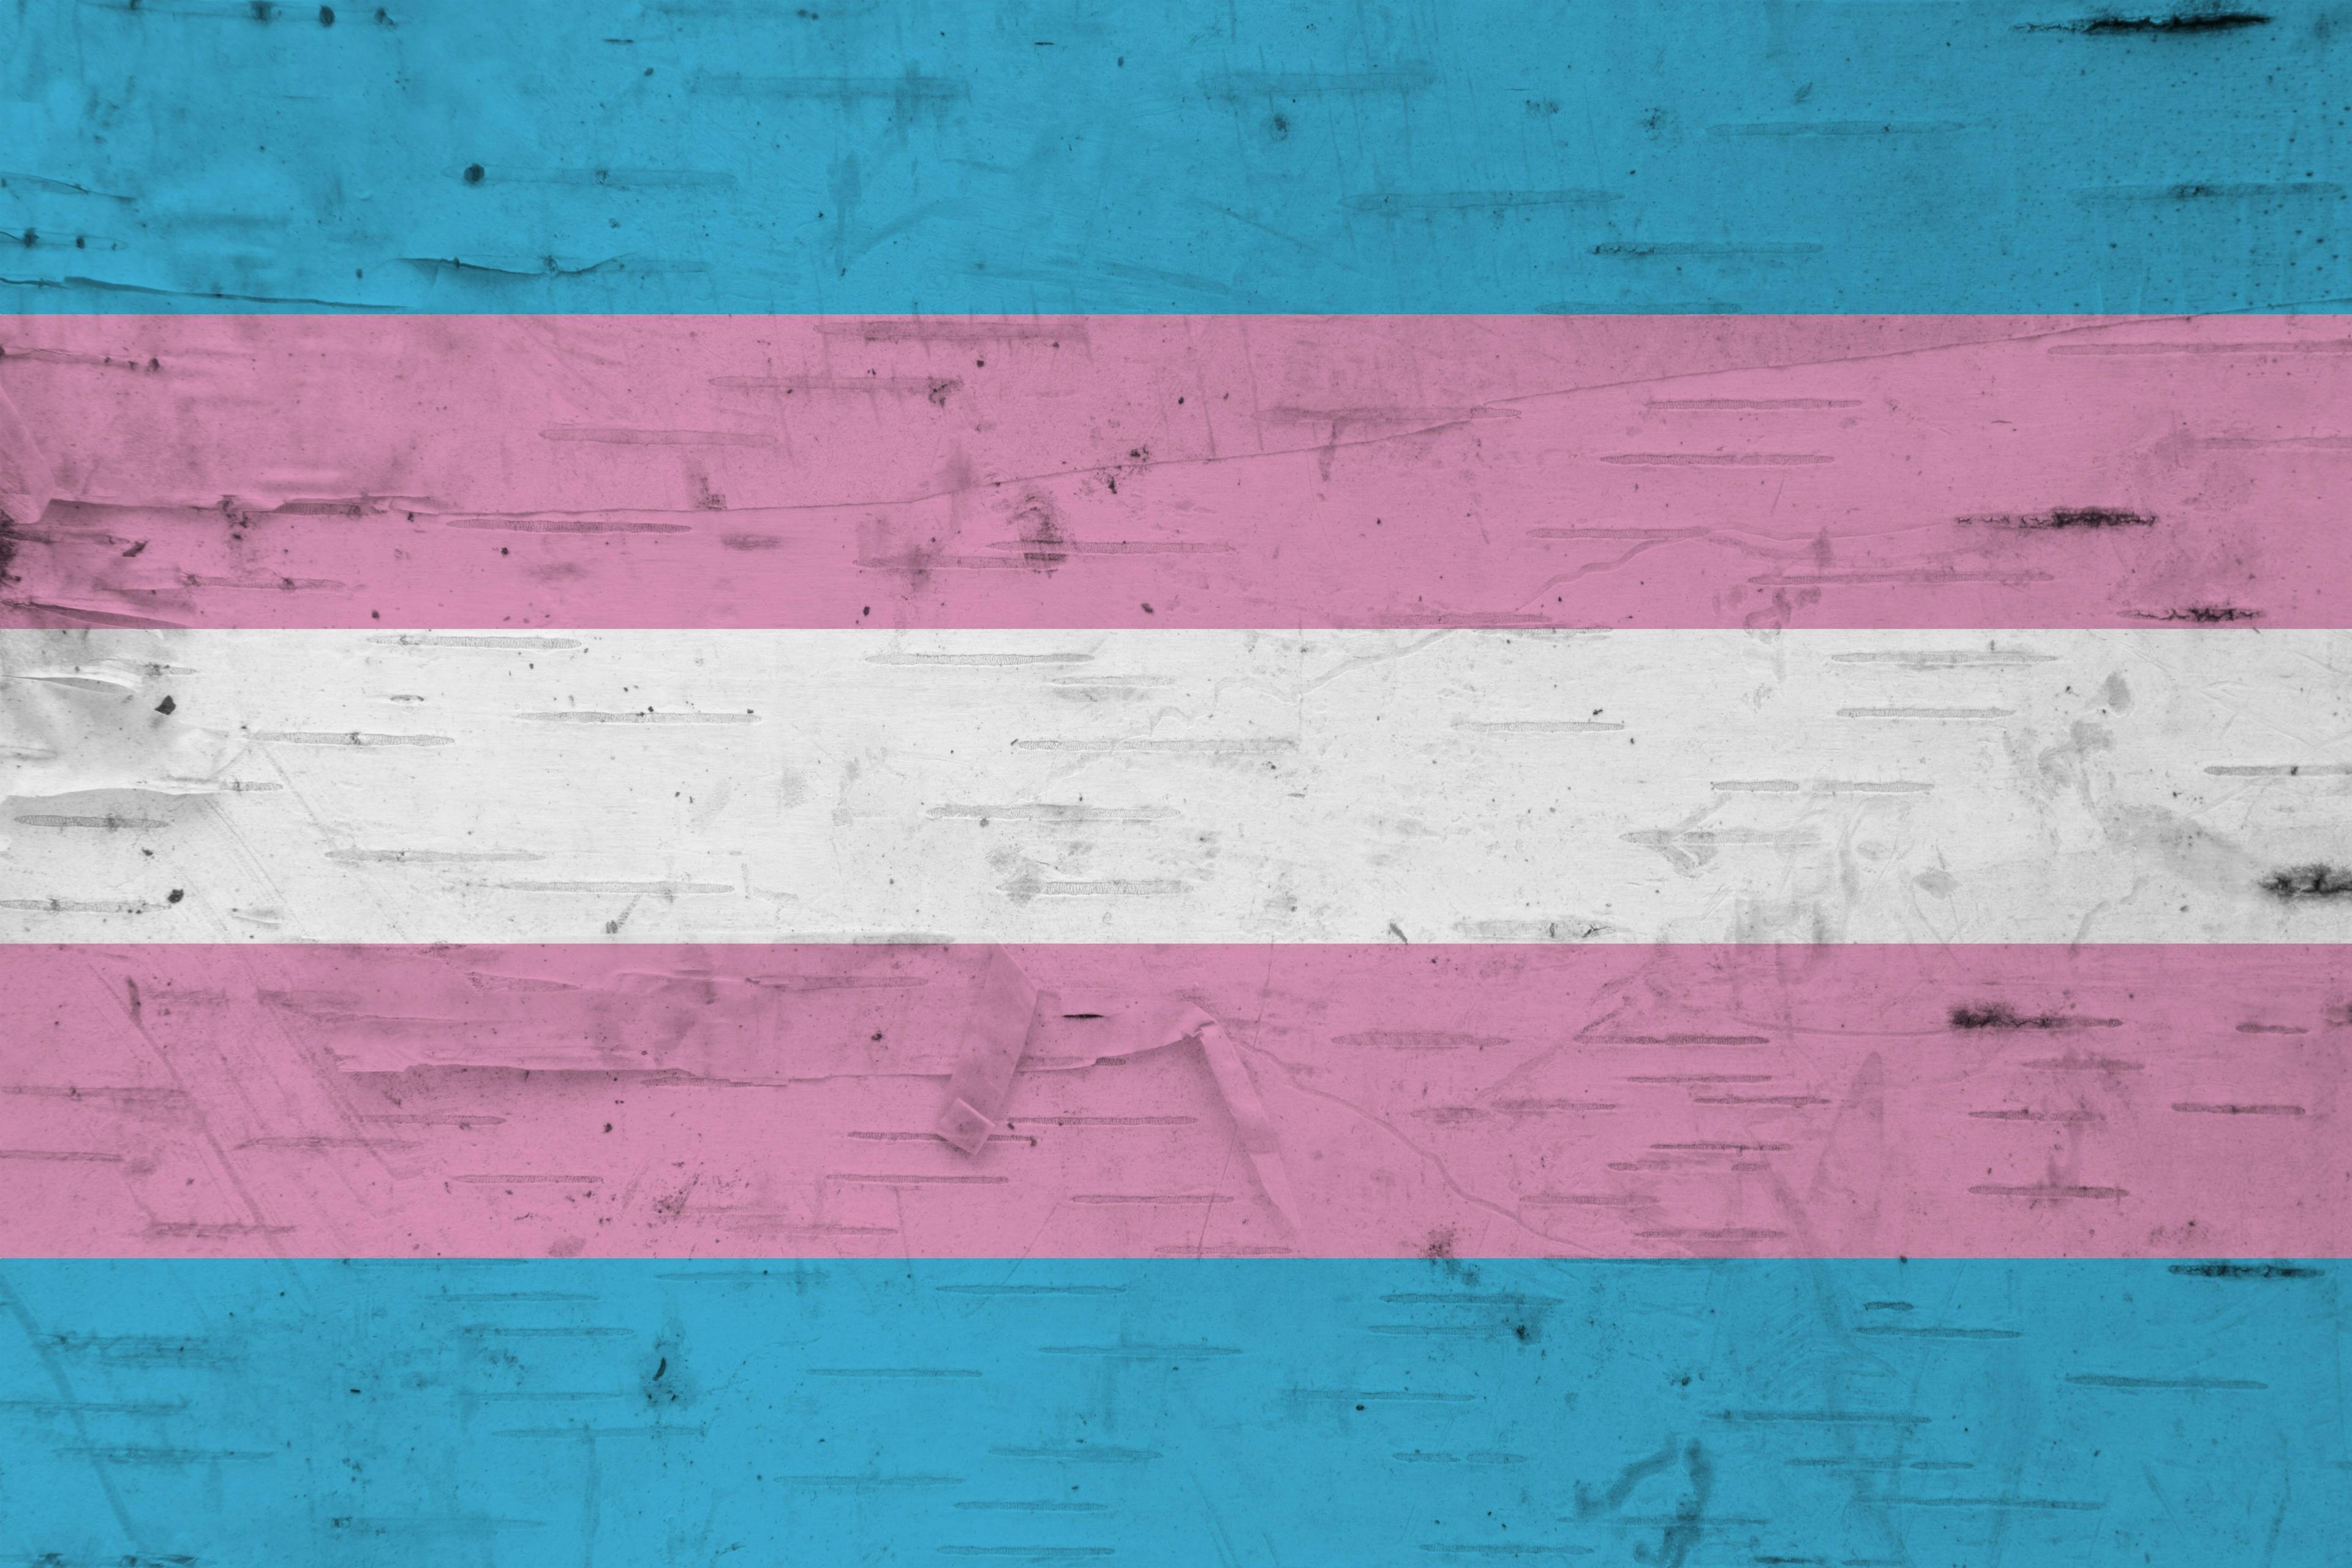 Will transgender care follow the path of abortion?